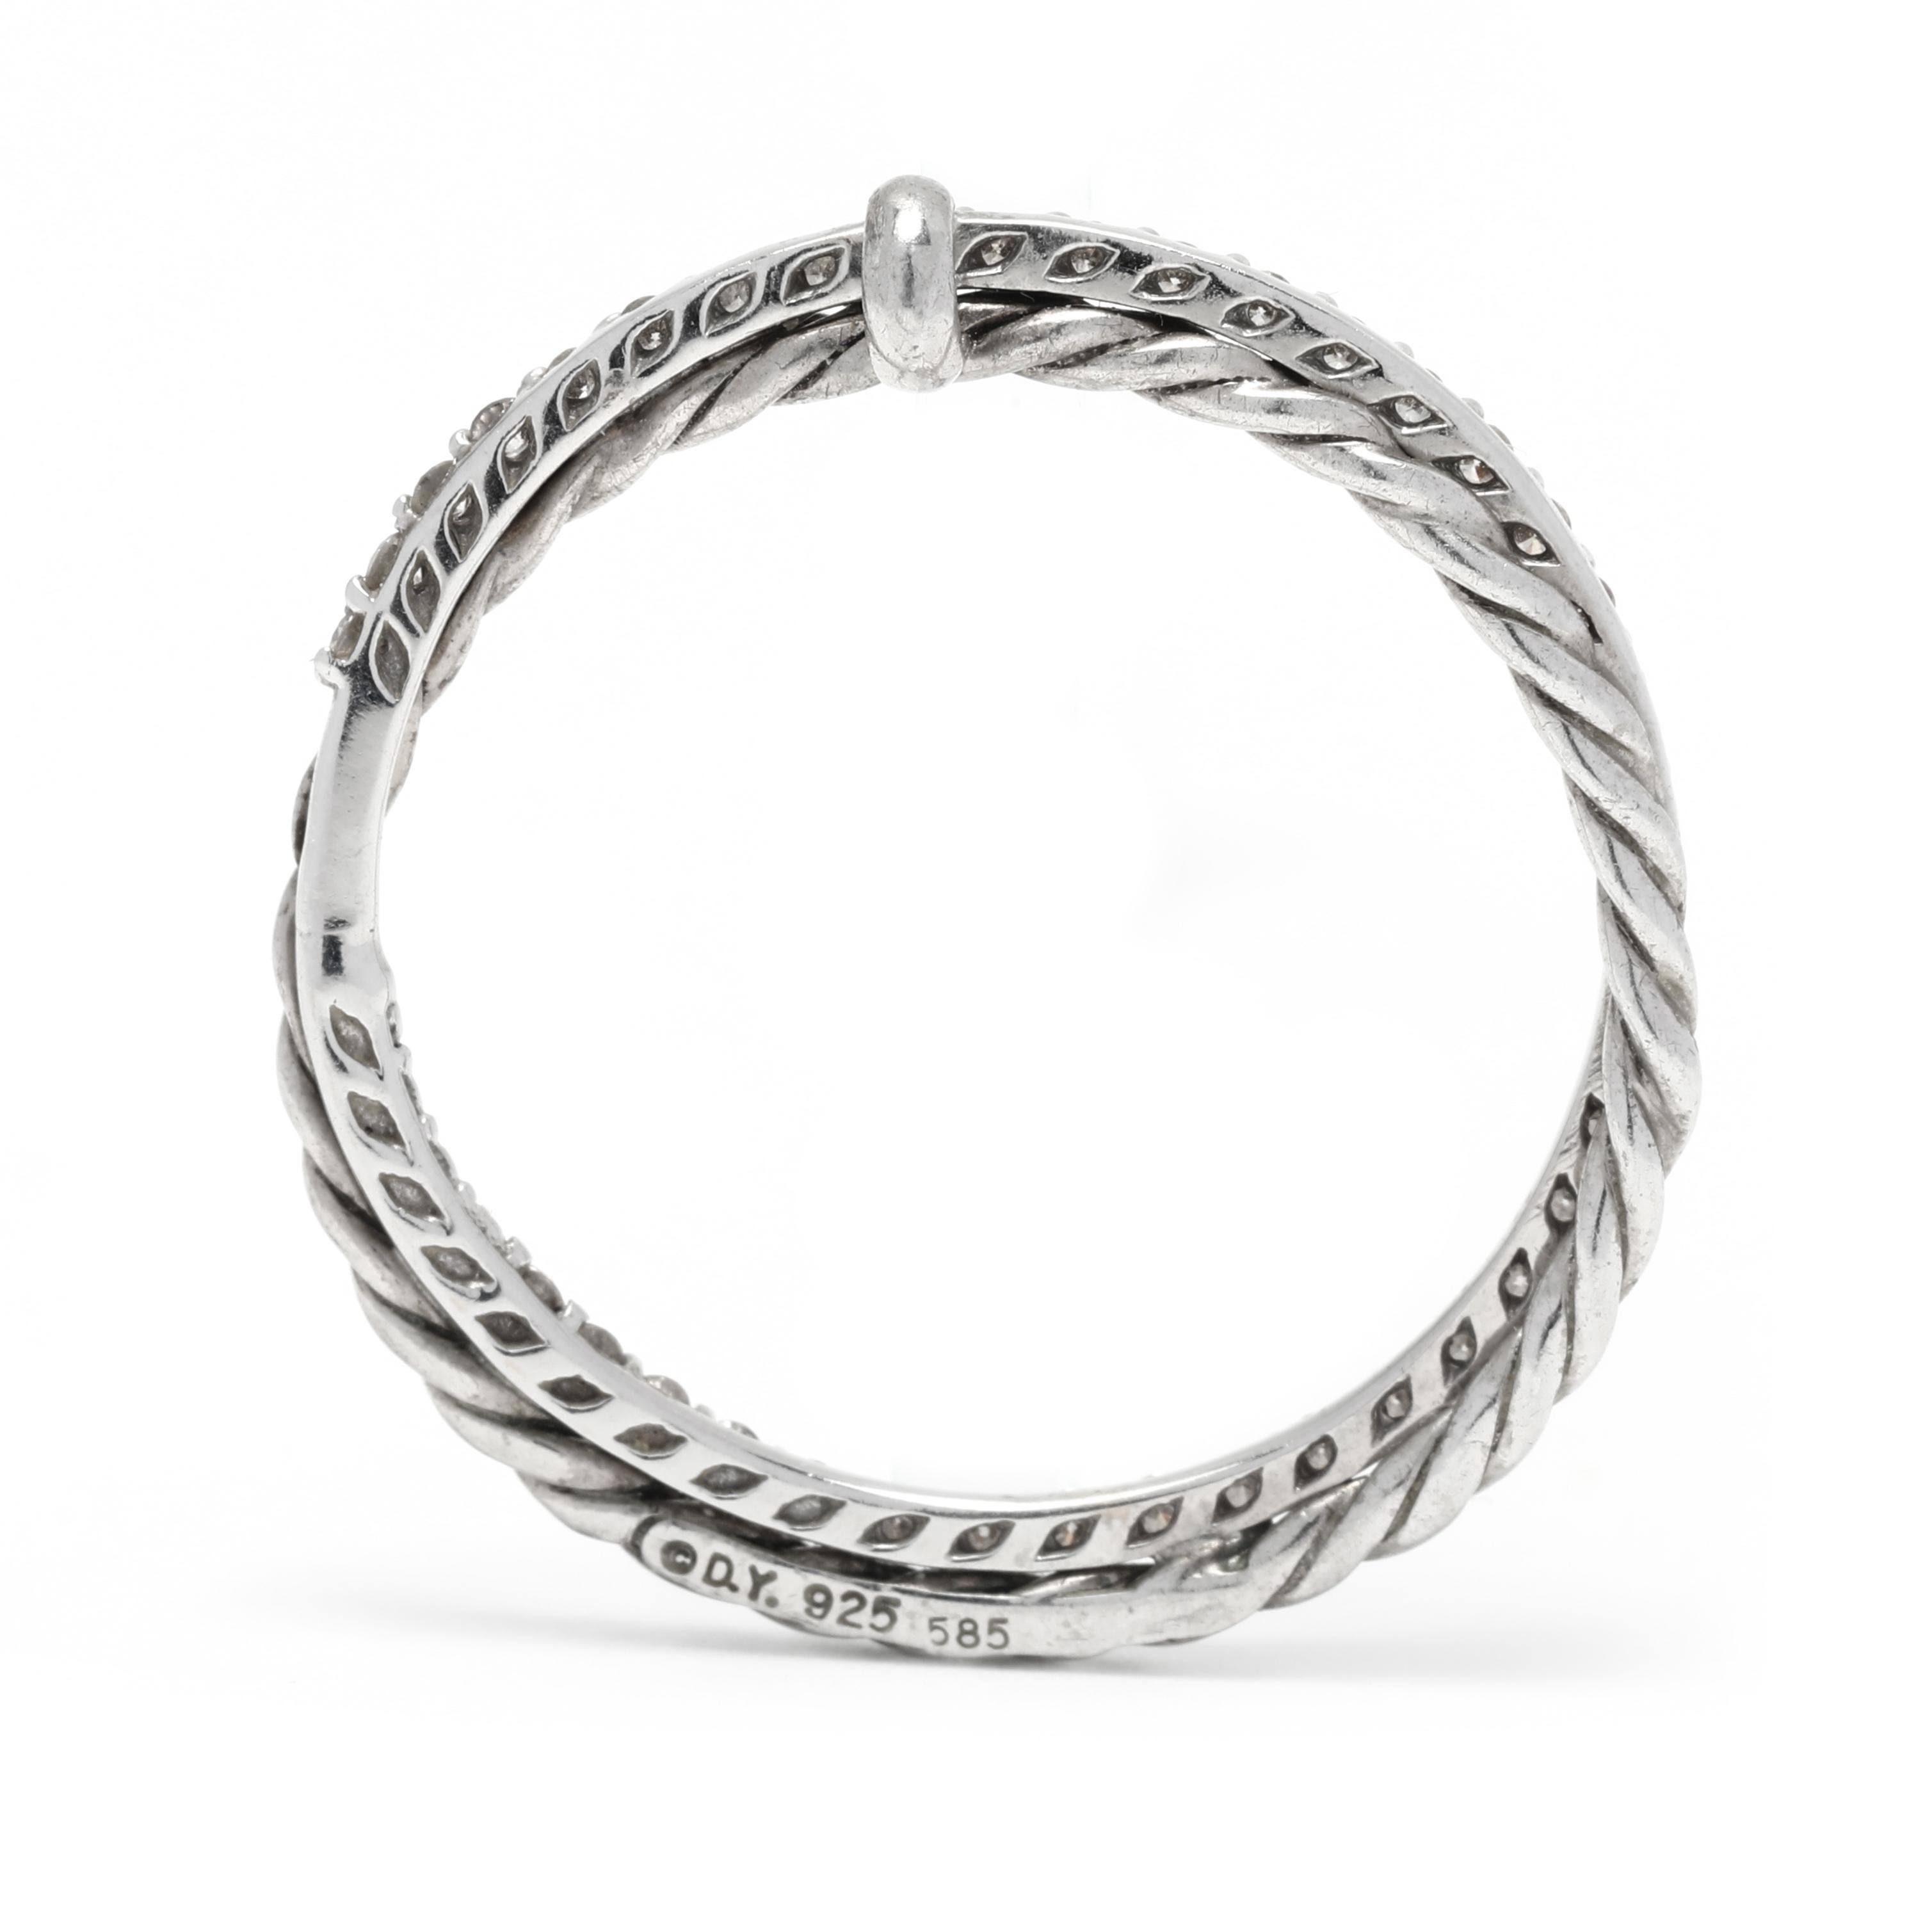 This stunning David Yurman pendant features a beautiful interlocking circle design crafted in 14K white gold and sterling silver. The pendant features a diamond-studded top with a total of .20ctw of diamonds, set in a pave setting. The pendant